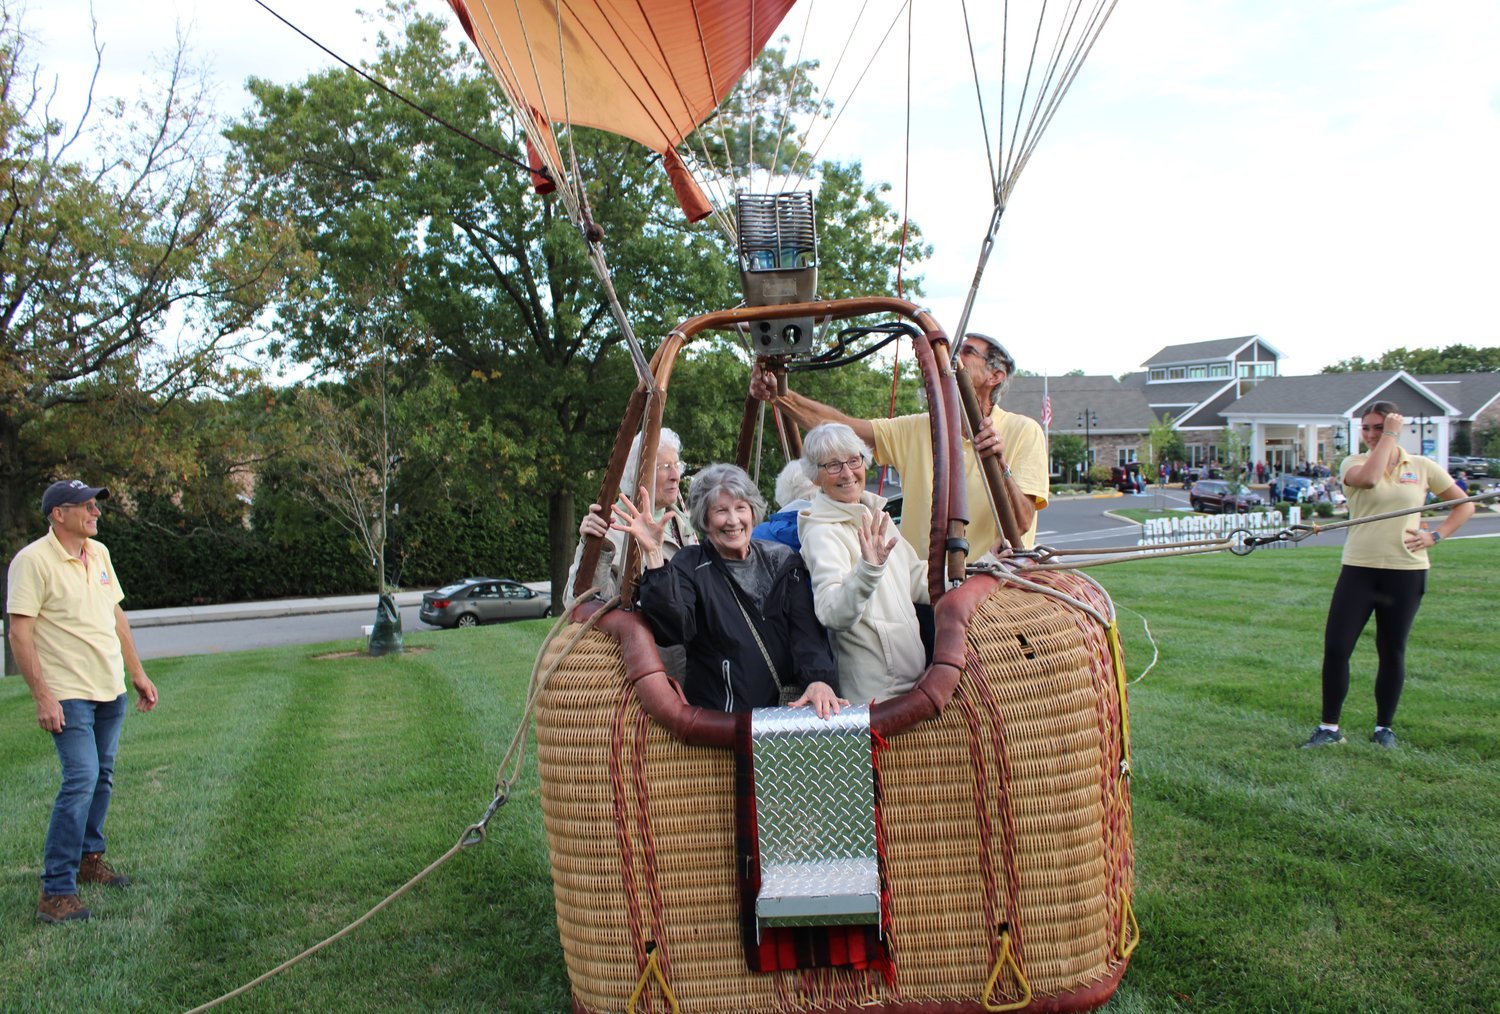 Over 50 Pine Run Retirement Community residents enjoyed tethered hot air balloon rides on its Ferry Road campus in Doylestown Wednesday, Sept. 28, 2022.